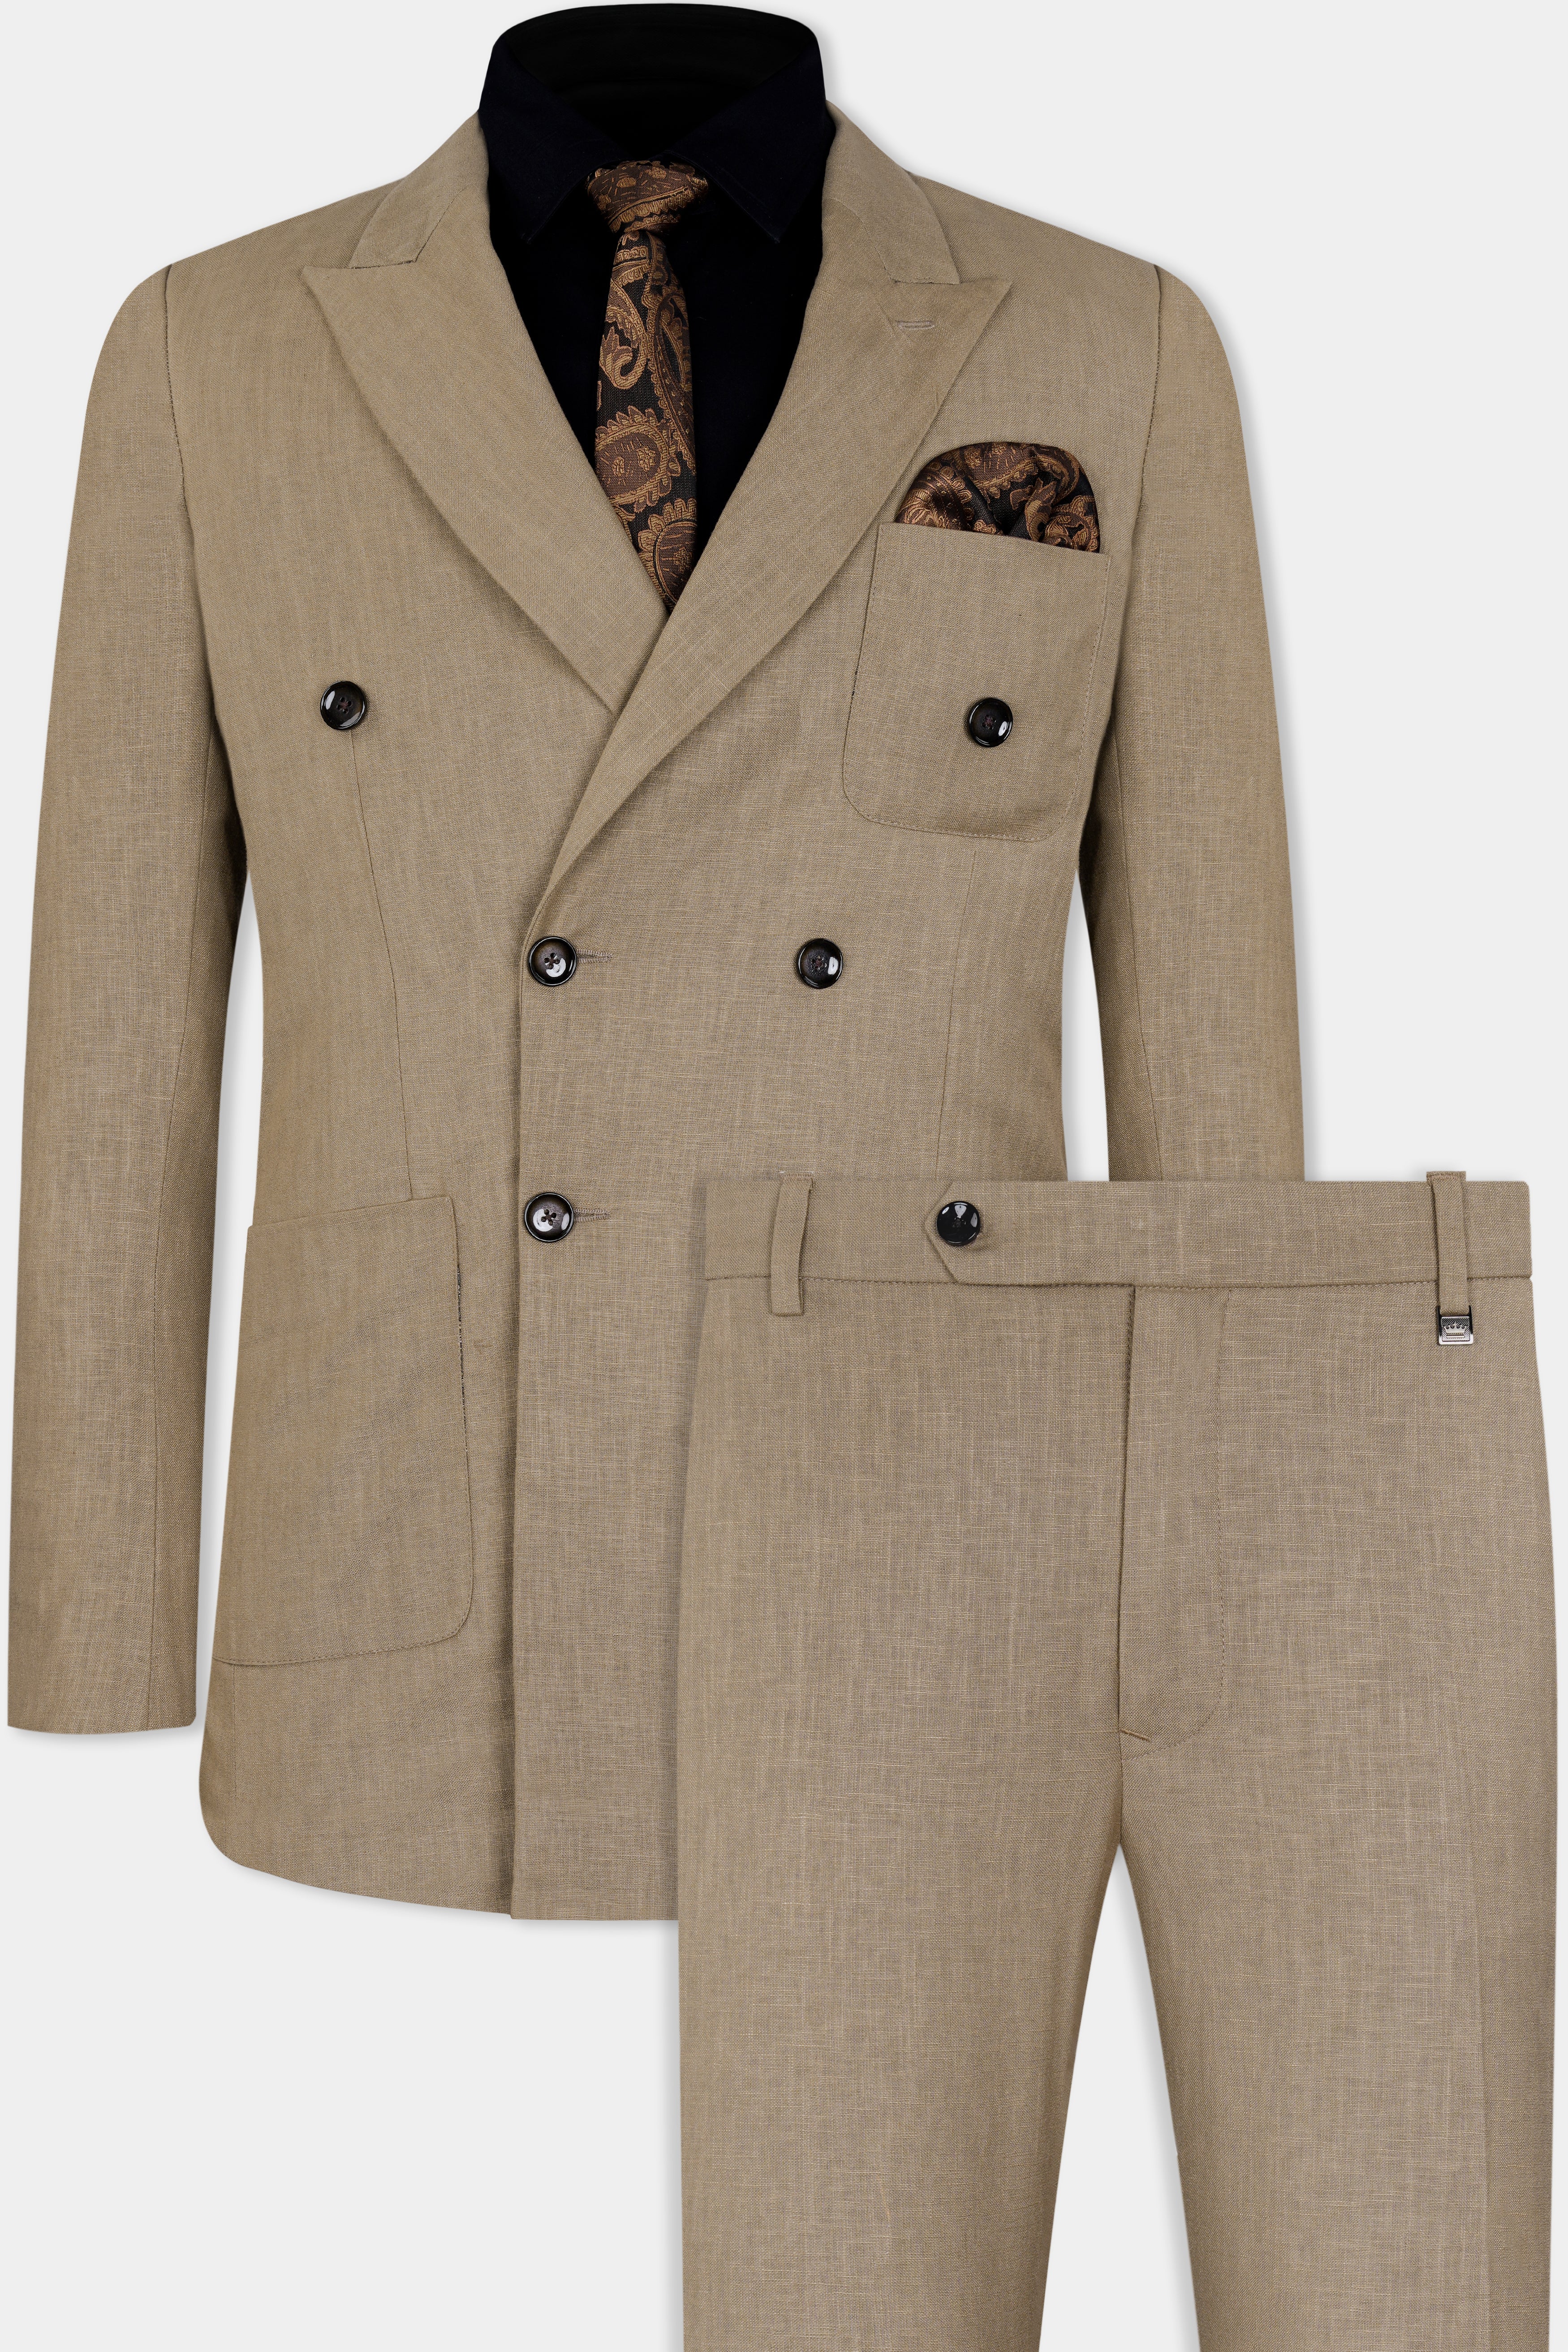 Sandrift Brown Luxurious Linen Double Breasted Sports Suit ST2926-DB-PP-36,ST2926-DB-PP-38,ST2926-DB-PP-40,ST2926-DB-PP-42,ST2926-DB-PP-44,ST2926-DB-PP-46,ST2926-DB-PP-48,ST2926-DB-PP-50,ST2926-DB-PP-52,ST2926-DB-PP-54,ST2926-DB-PP-56,ST2926-DB-PP-58,ST2926-DB-PP-60